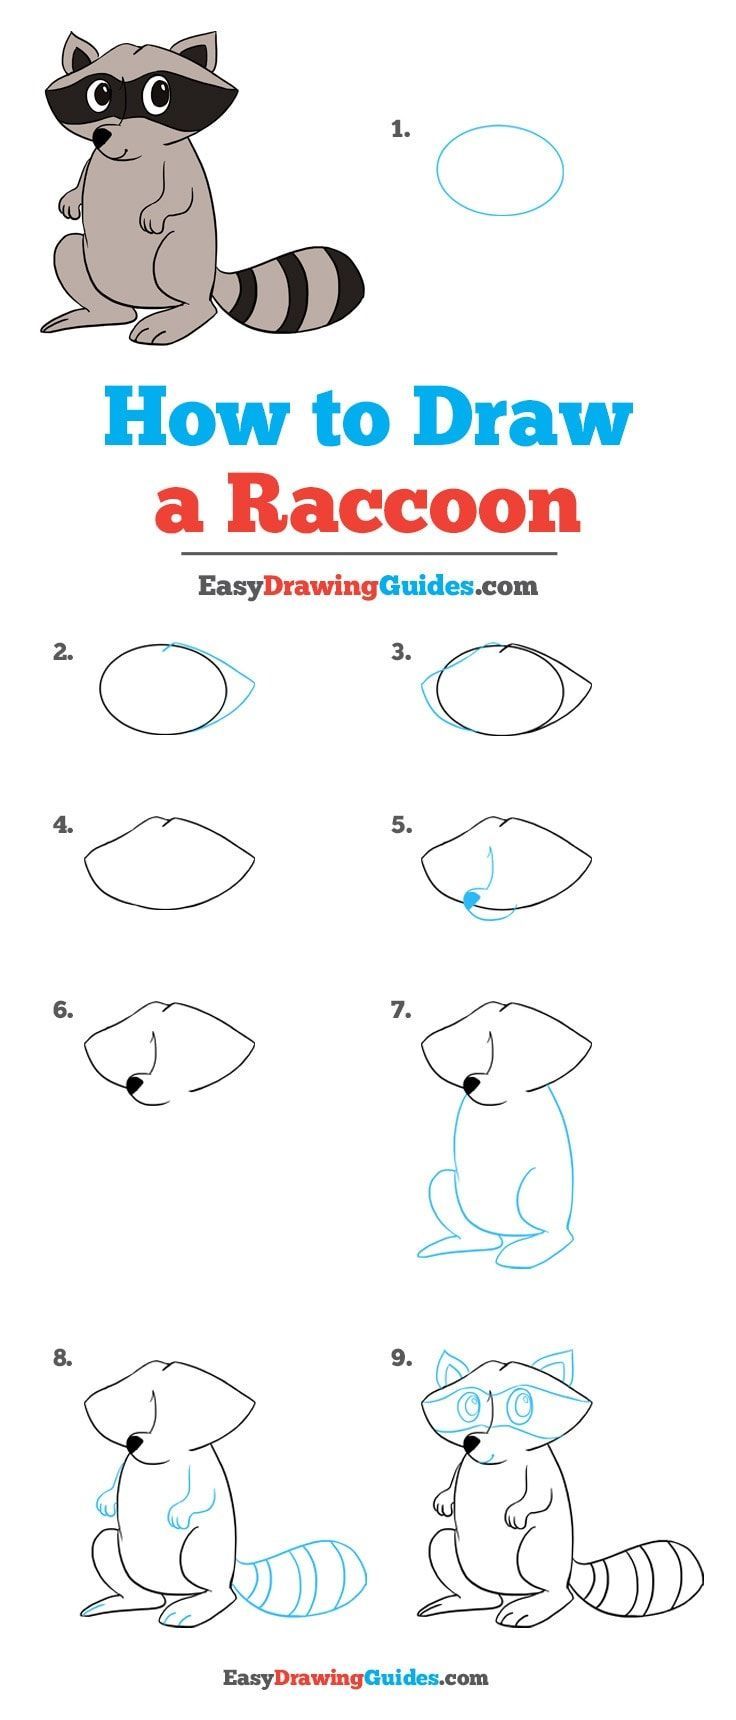 How To Draw A Raccoon - Really Easy Drawing Tutorial